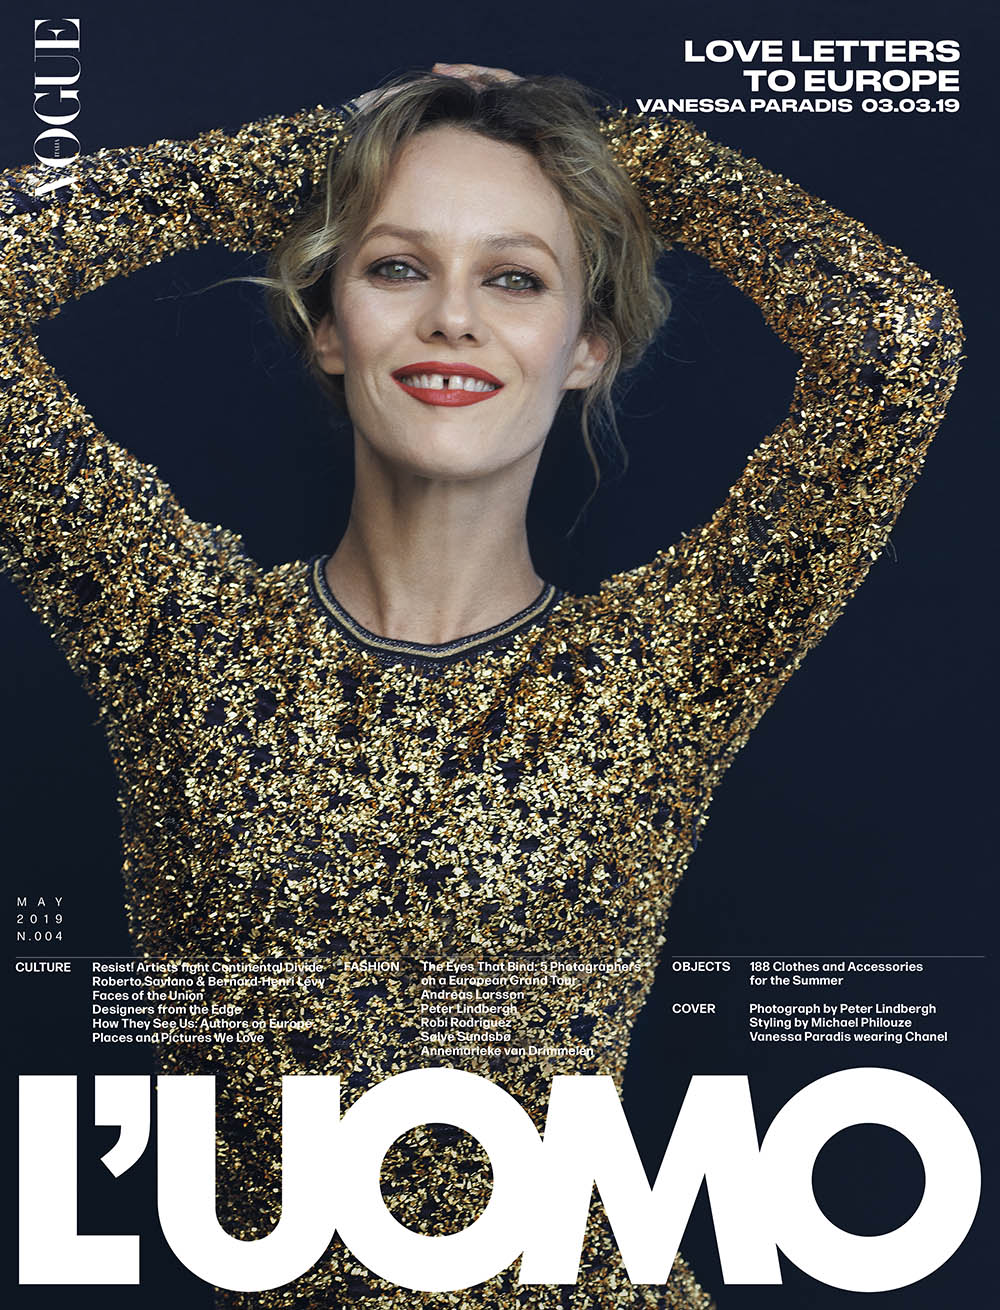 Vanessa Paradis covers L'Uomo Vogue May 2019 by Peter Lindbergh